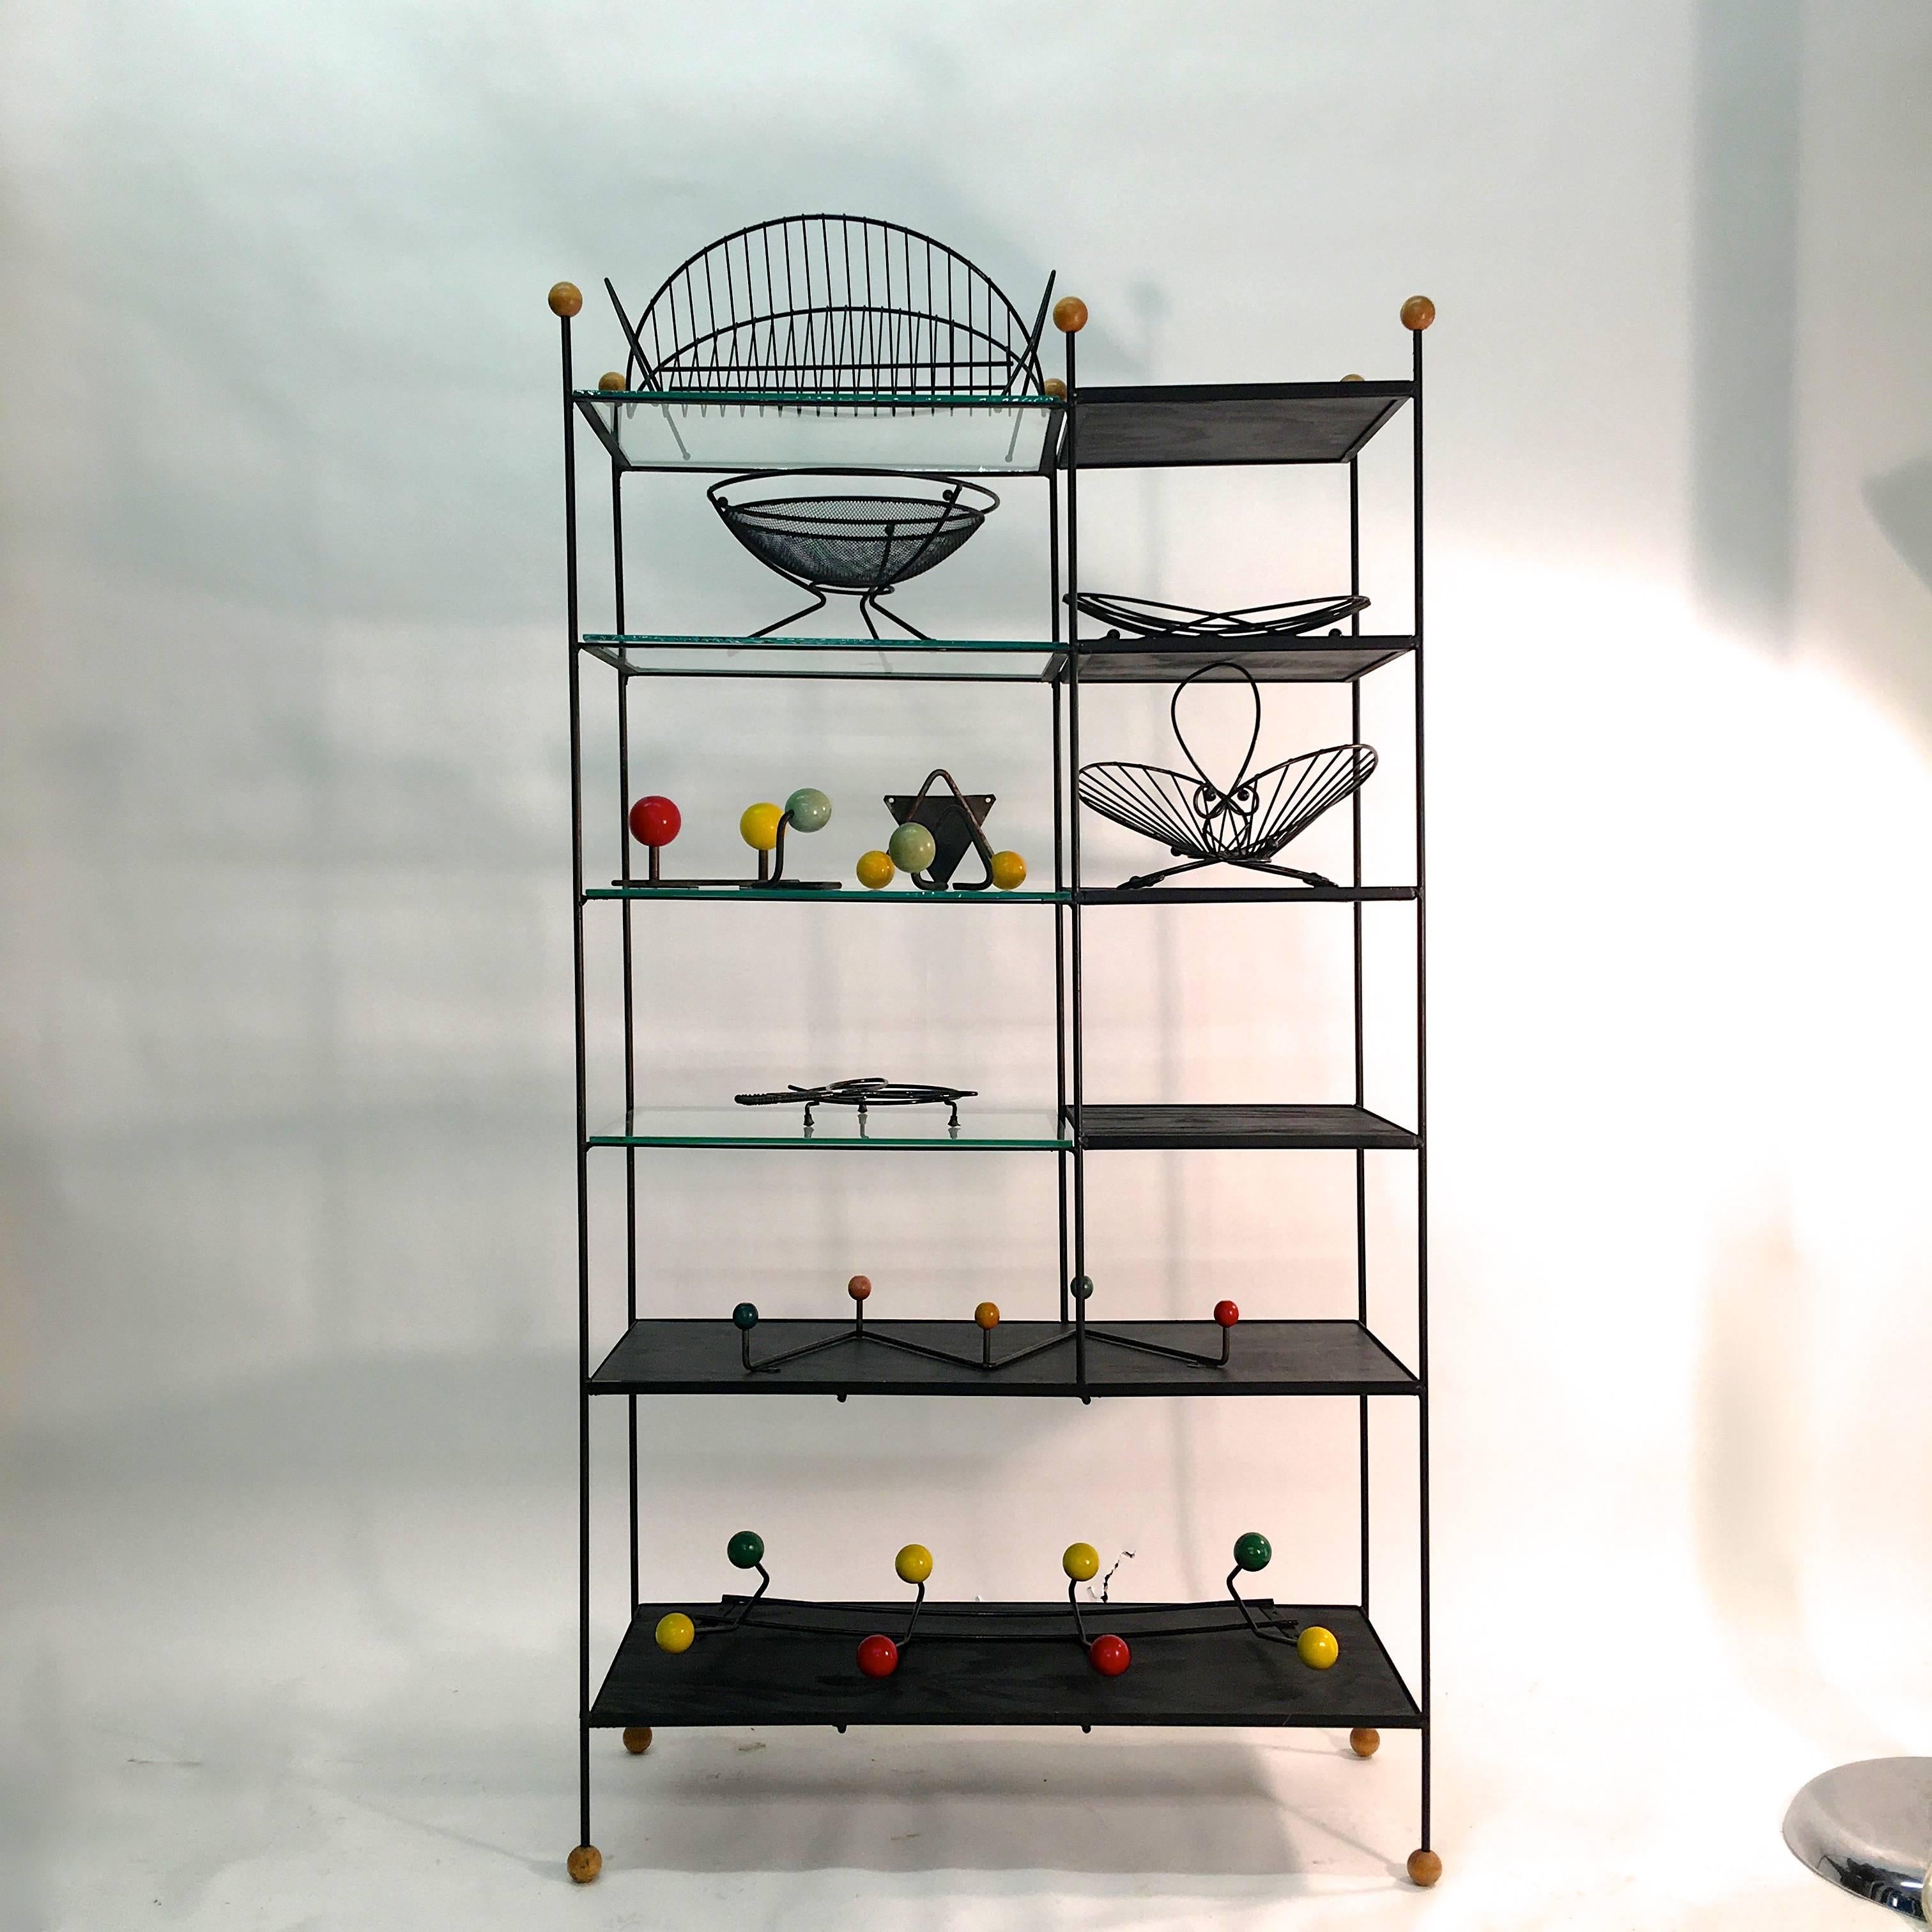 PLEASE NOTE THIS IS ONE ETAGERE. NOT “a set”. PRICE SHOWN IS FOR THE ONE. 

A single mid-century modern blackened iron framed étagère with inset painted wood and glass shelves and wood balls for feet and finials. This came out of the post-war modern